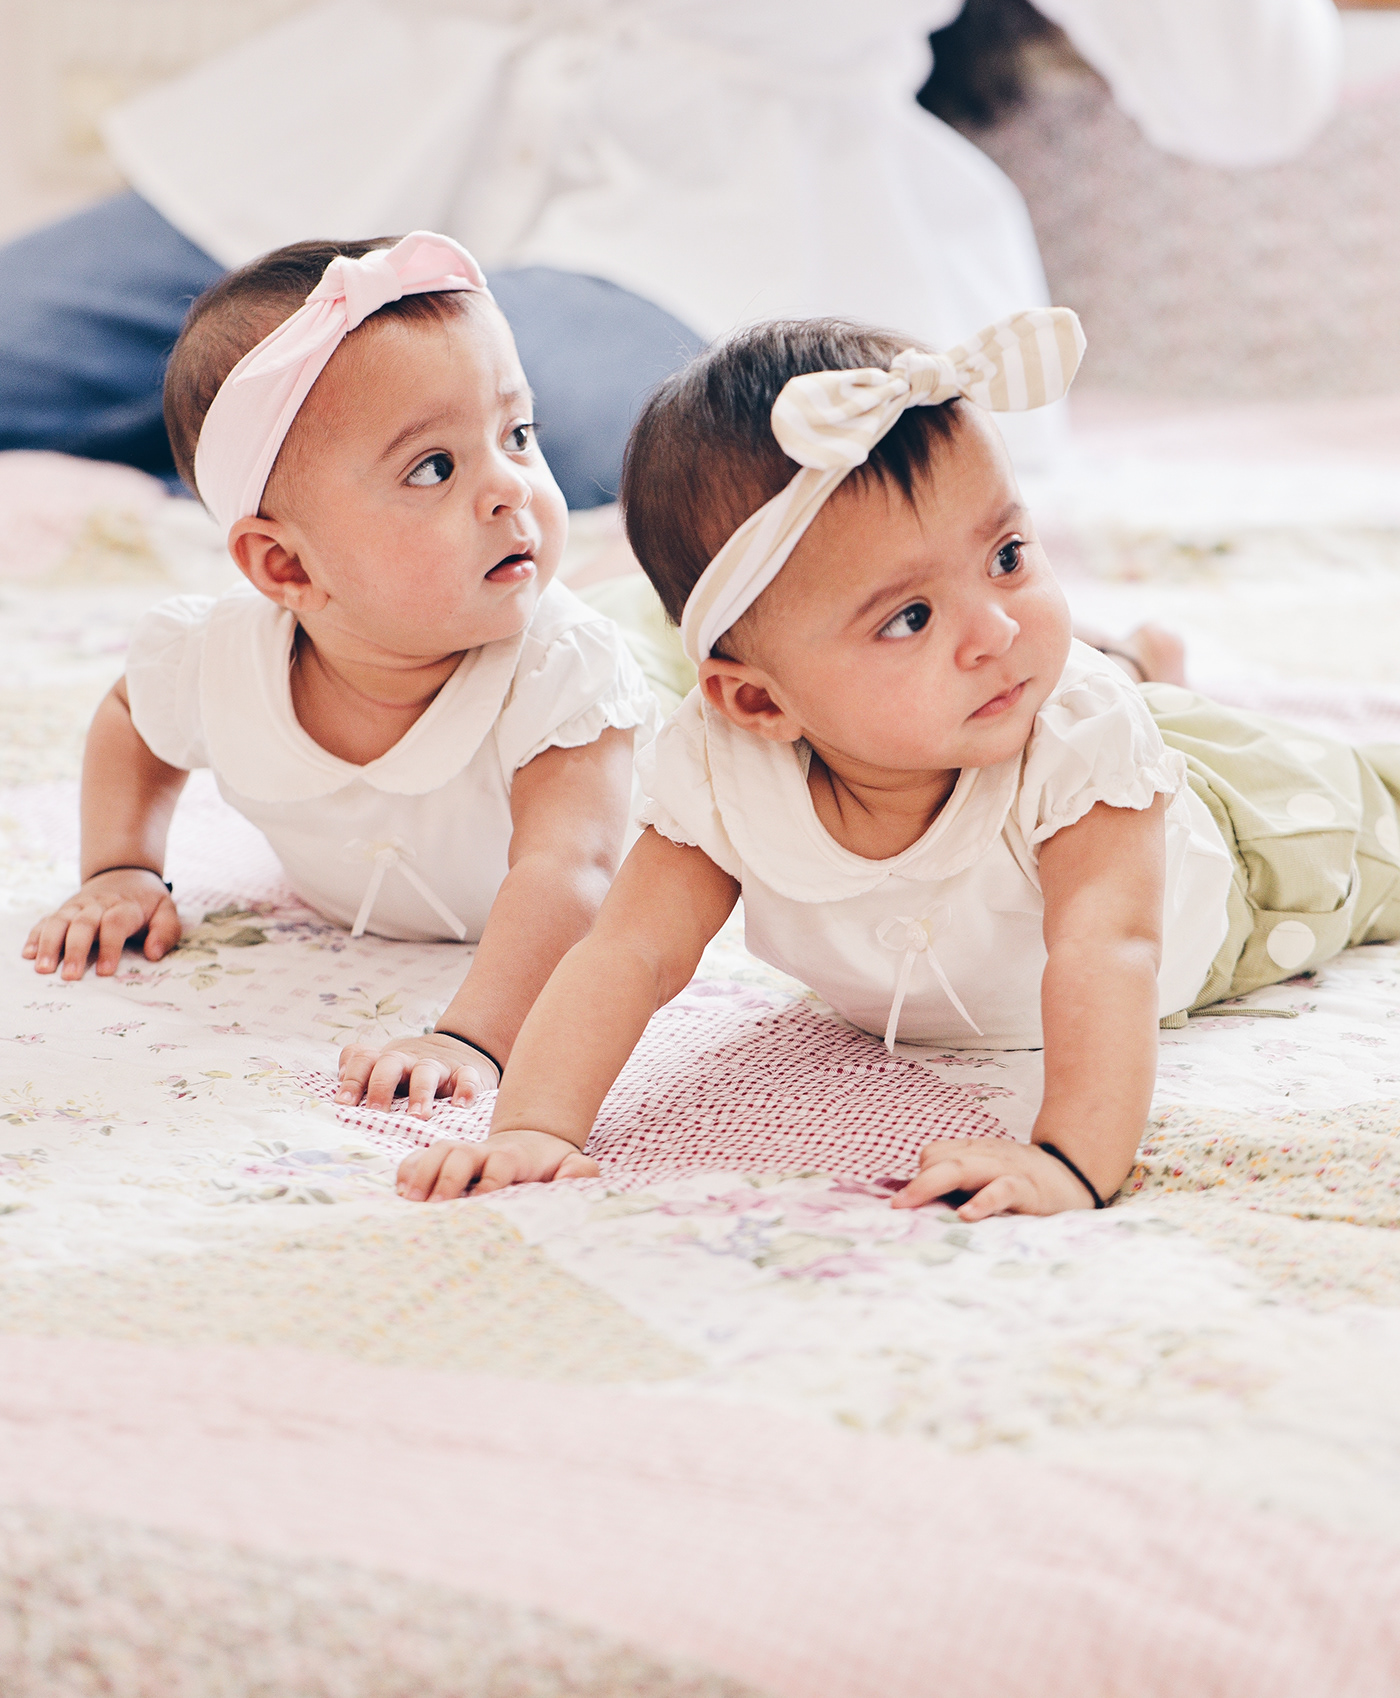 babies baby photographer cute girls infant infant photographer innocent kids kids photography Lifestyle Photographer photographer Photography  twinning Twins